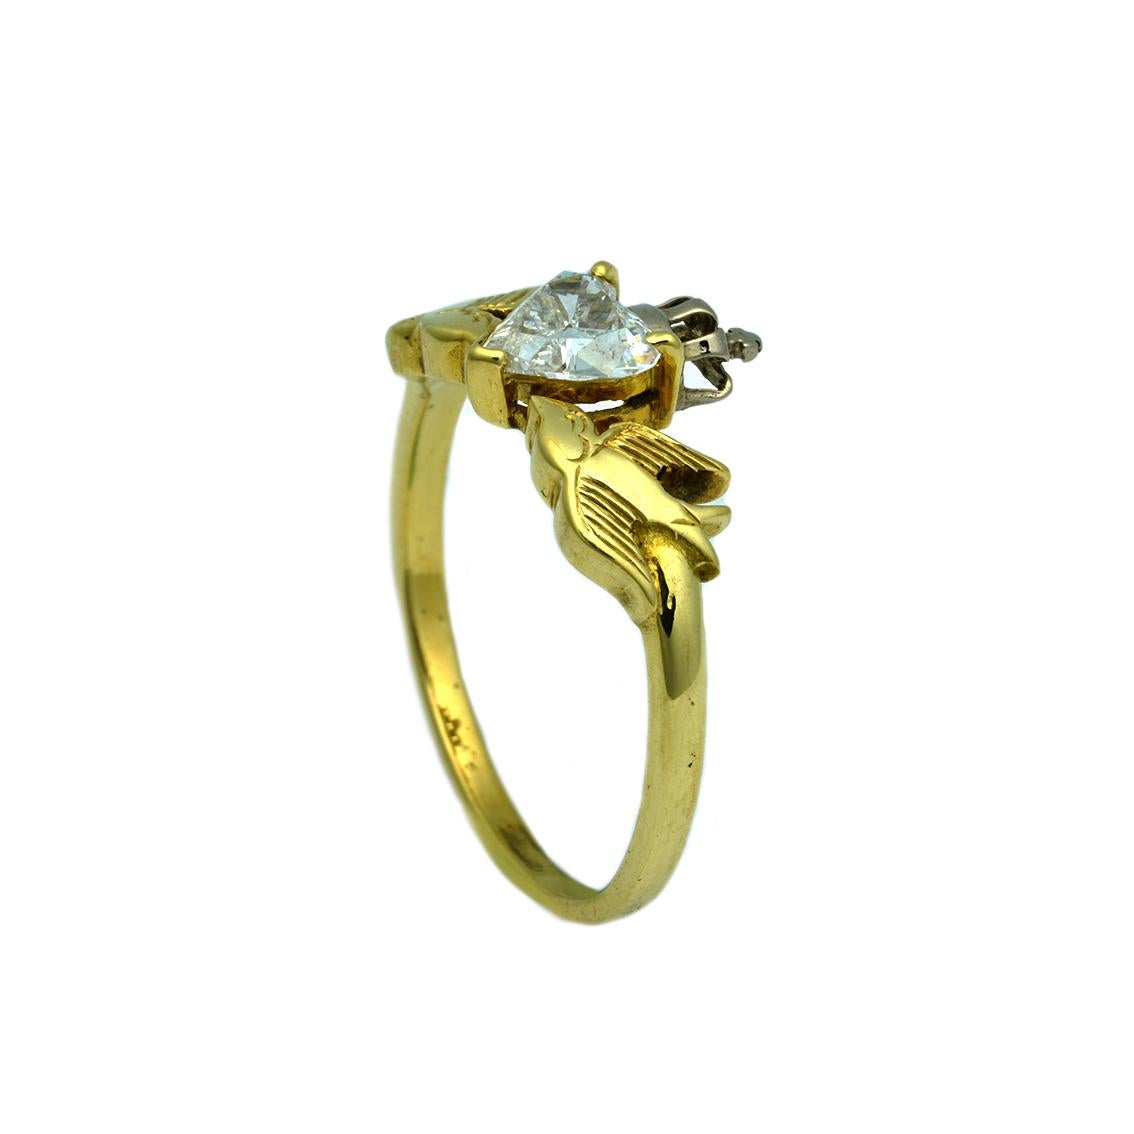 This Crowned Heart & Swallows Ring is a splendid piece and would make an enchanting engagement ring. 

Handmade in 18kt yellow and white gold, the ring features a heart, brilliant cut diamond, claw set approximately 0.55ct in weight, P1 in clarity